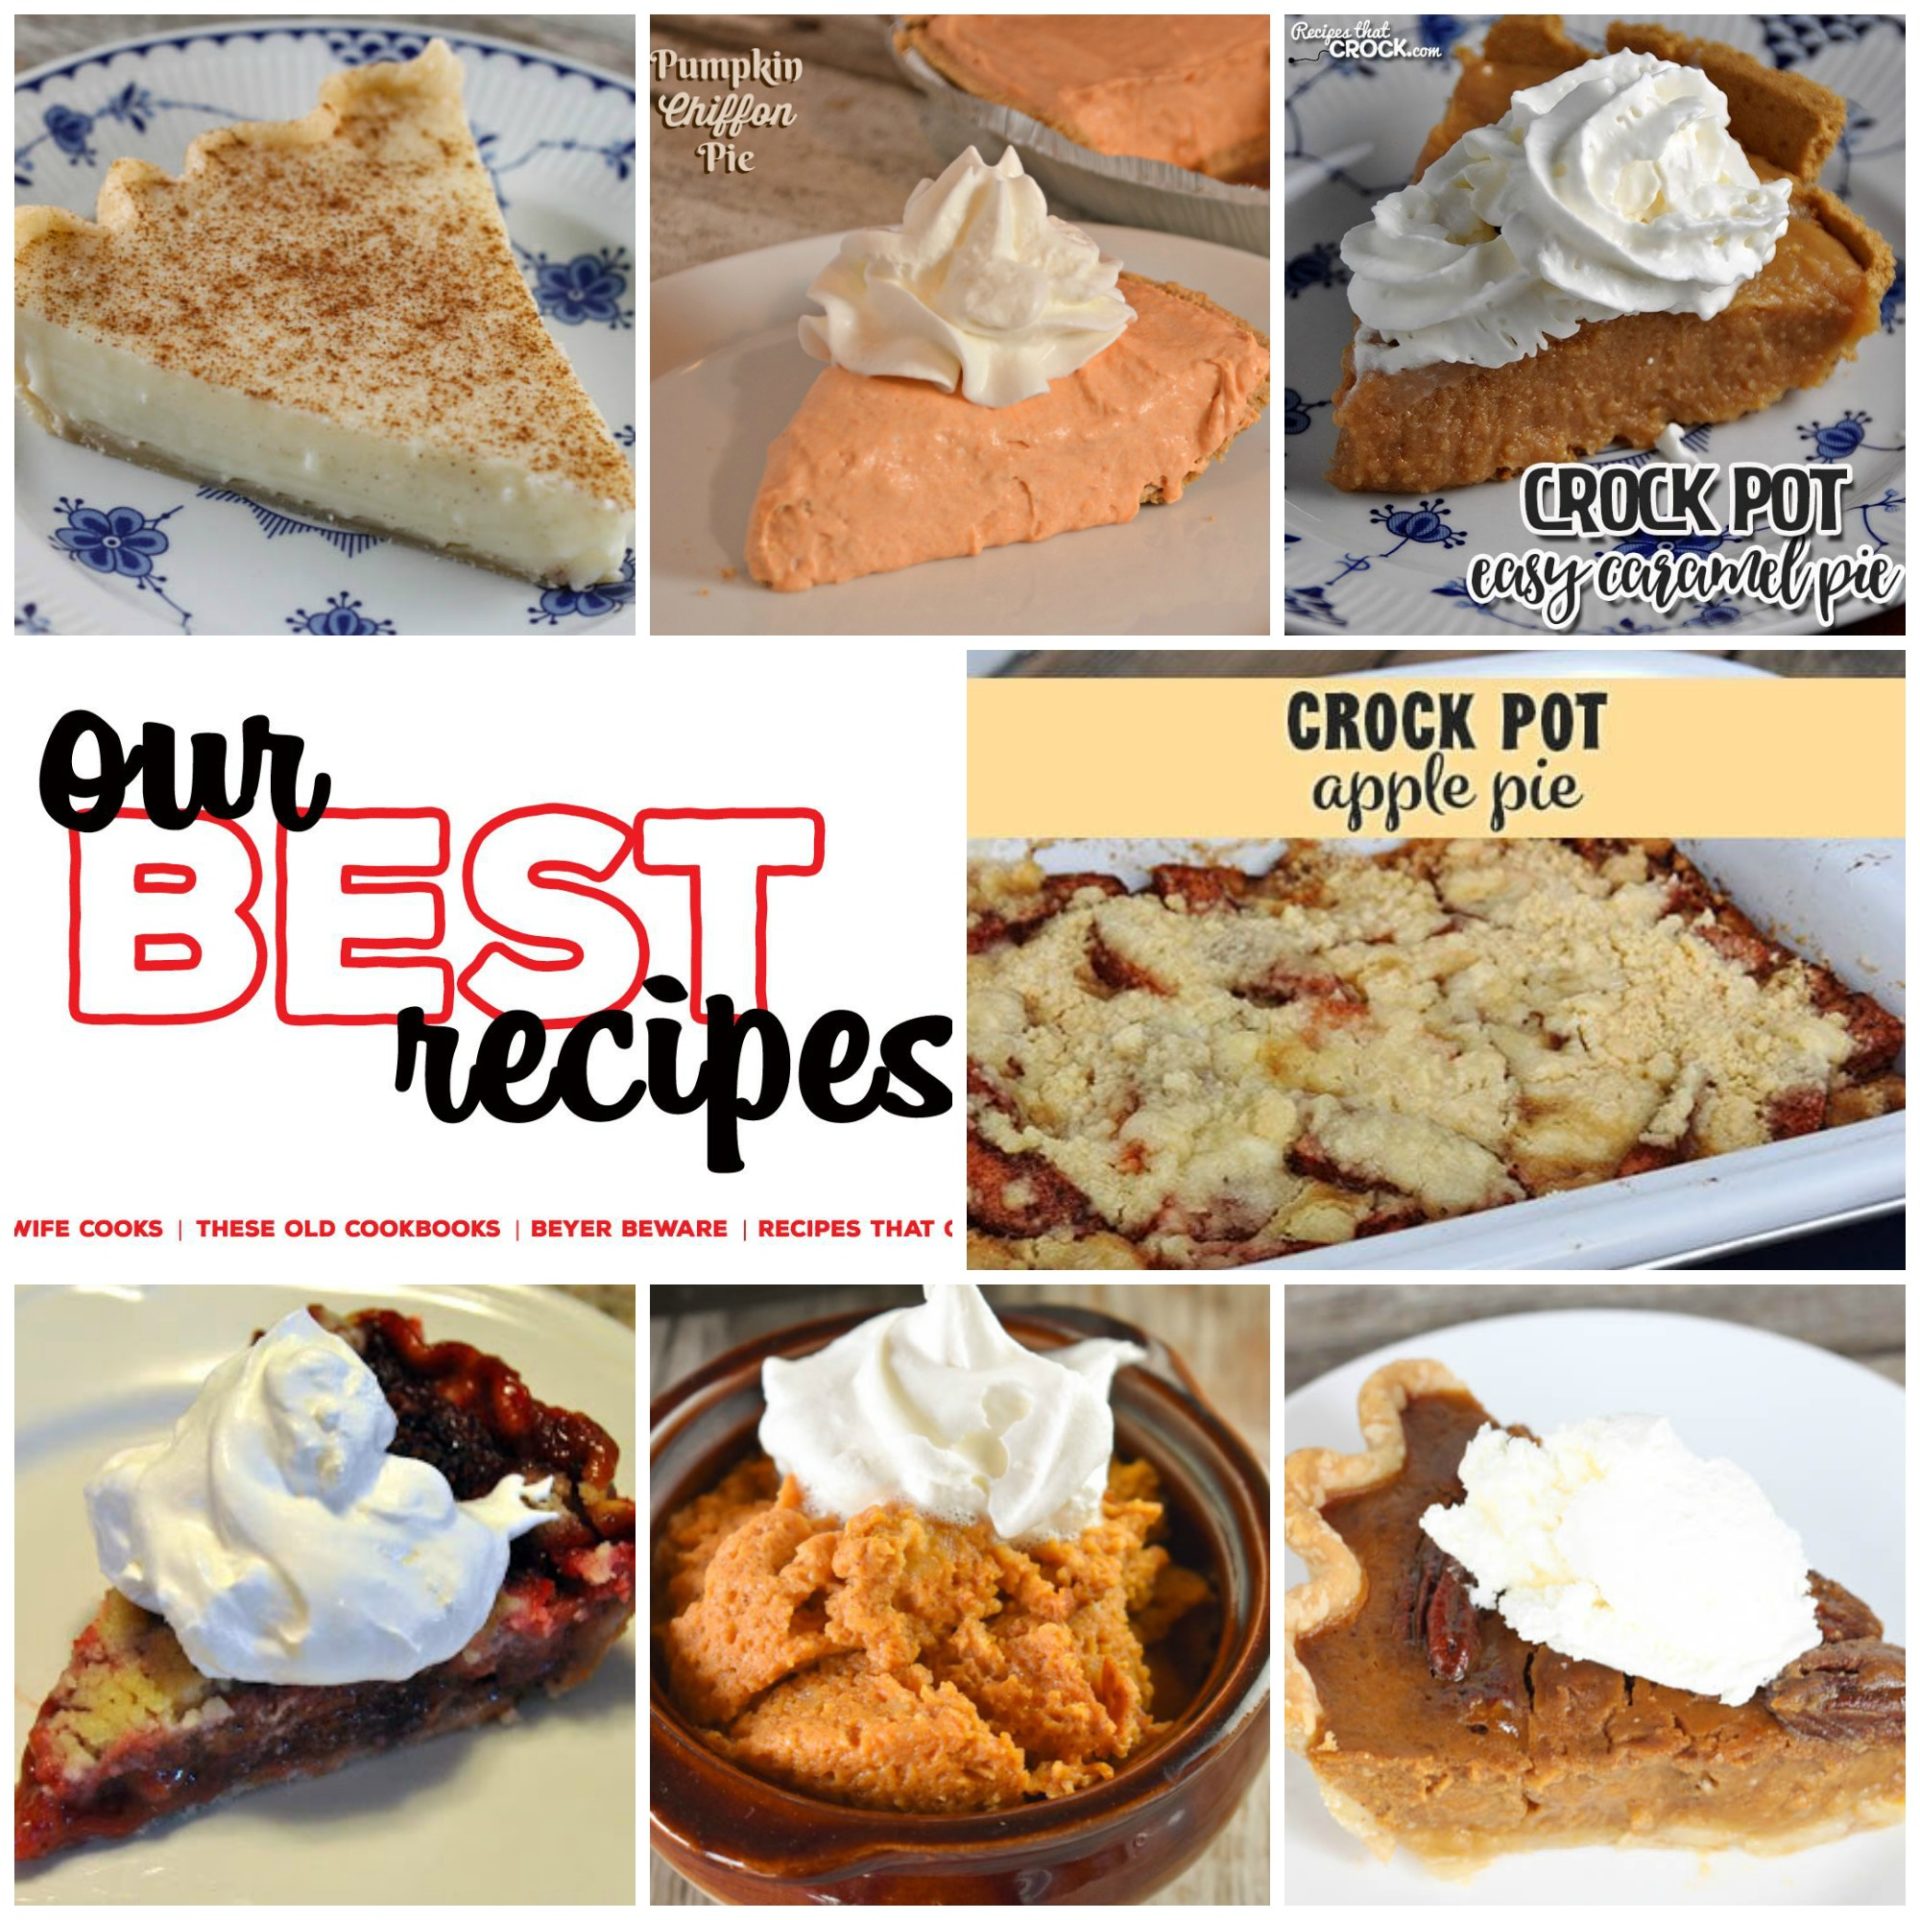 8 Delicious Pie Recipes (Our Best Recipes)